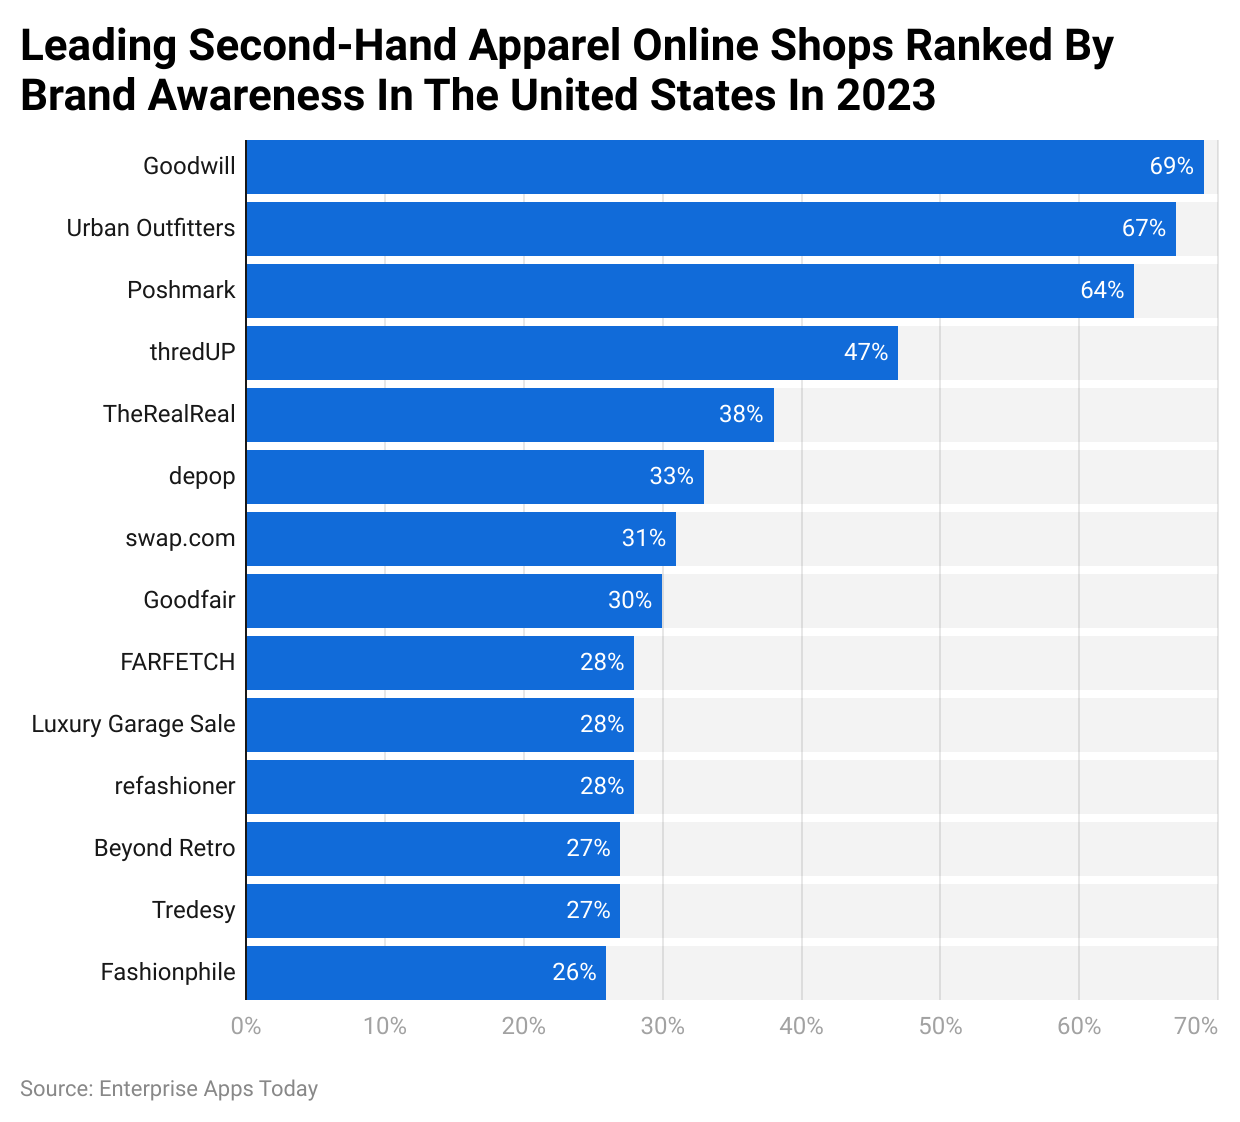 Leading second-hand apparel online shops ranked by brand awareness in the United States in 2023